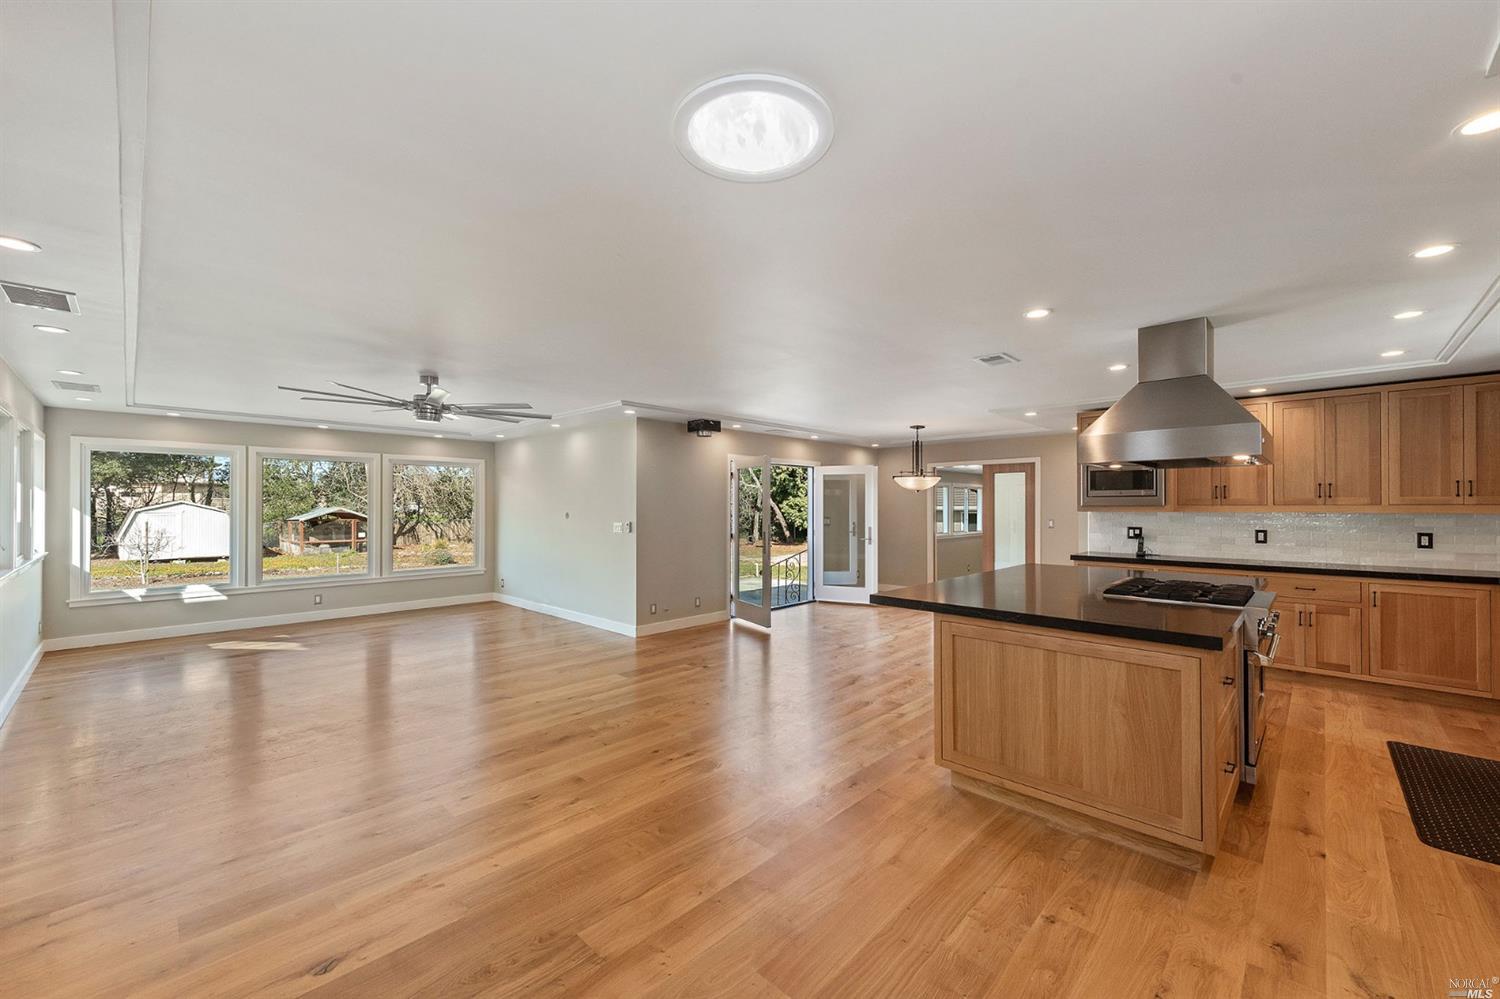 a large kitchen with a lot of counter space and a wooden floor